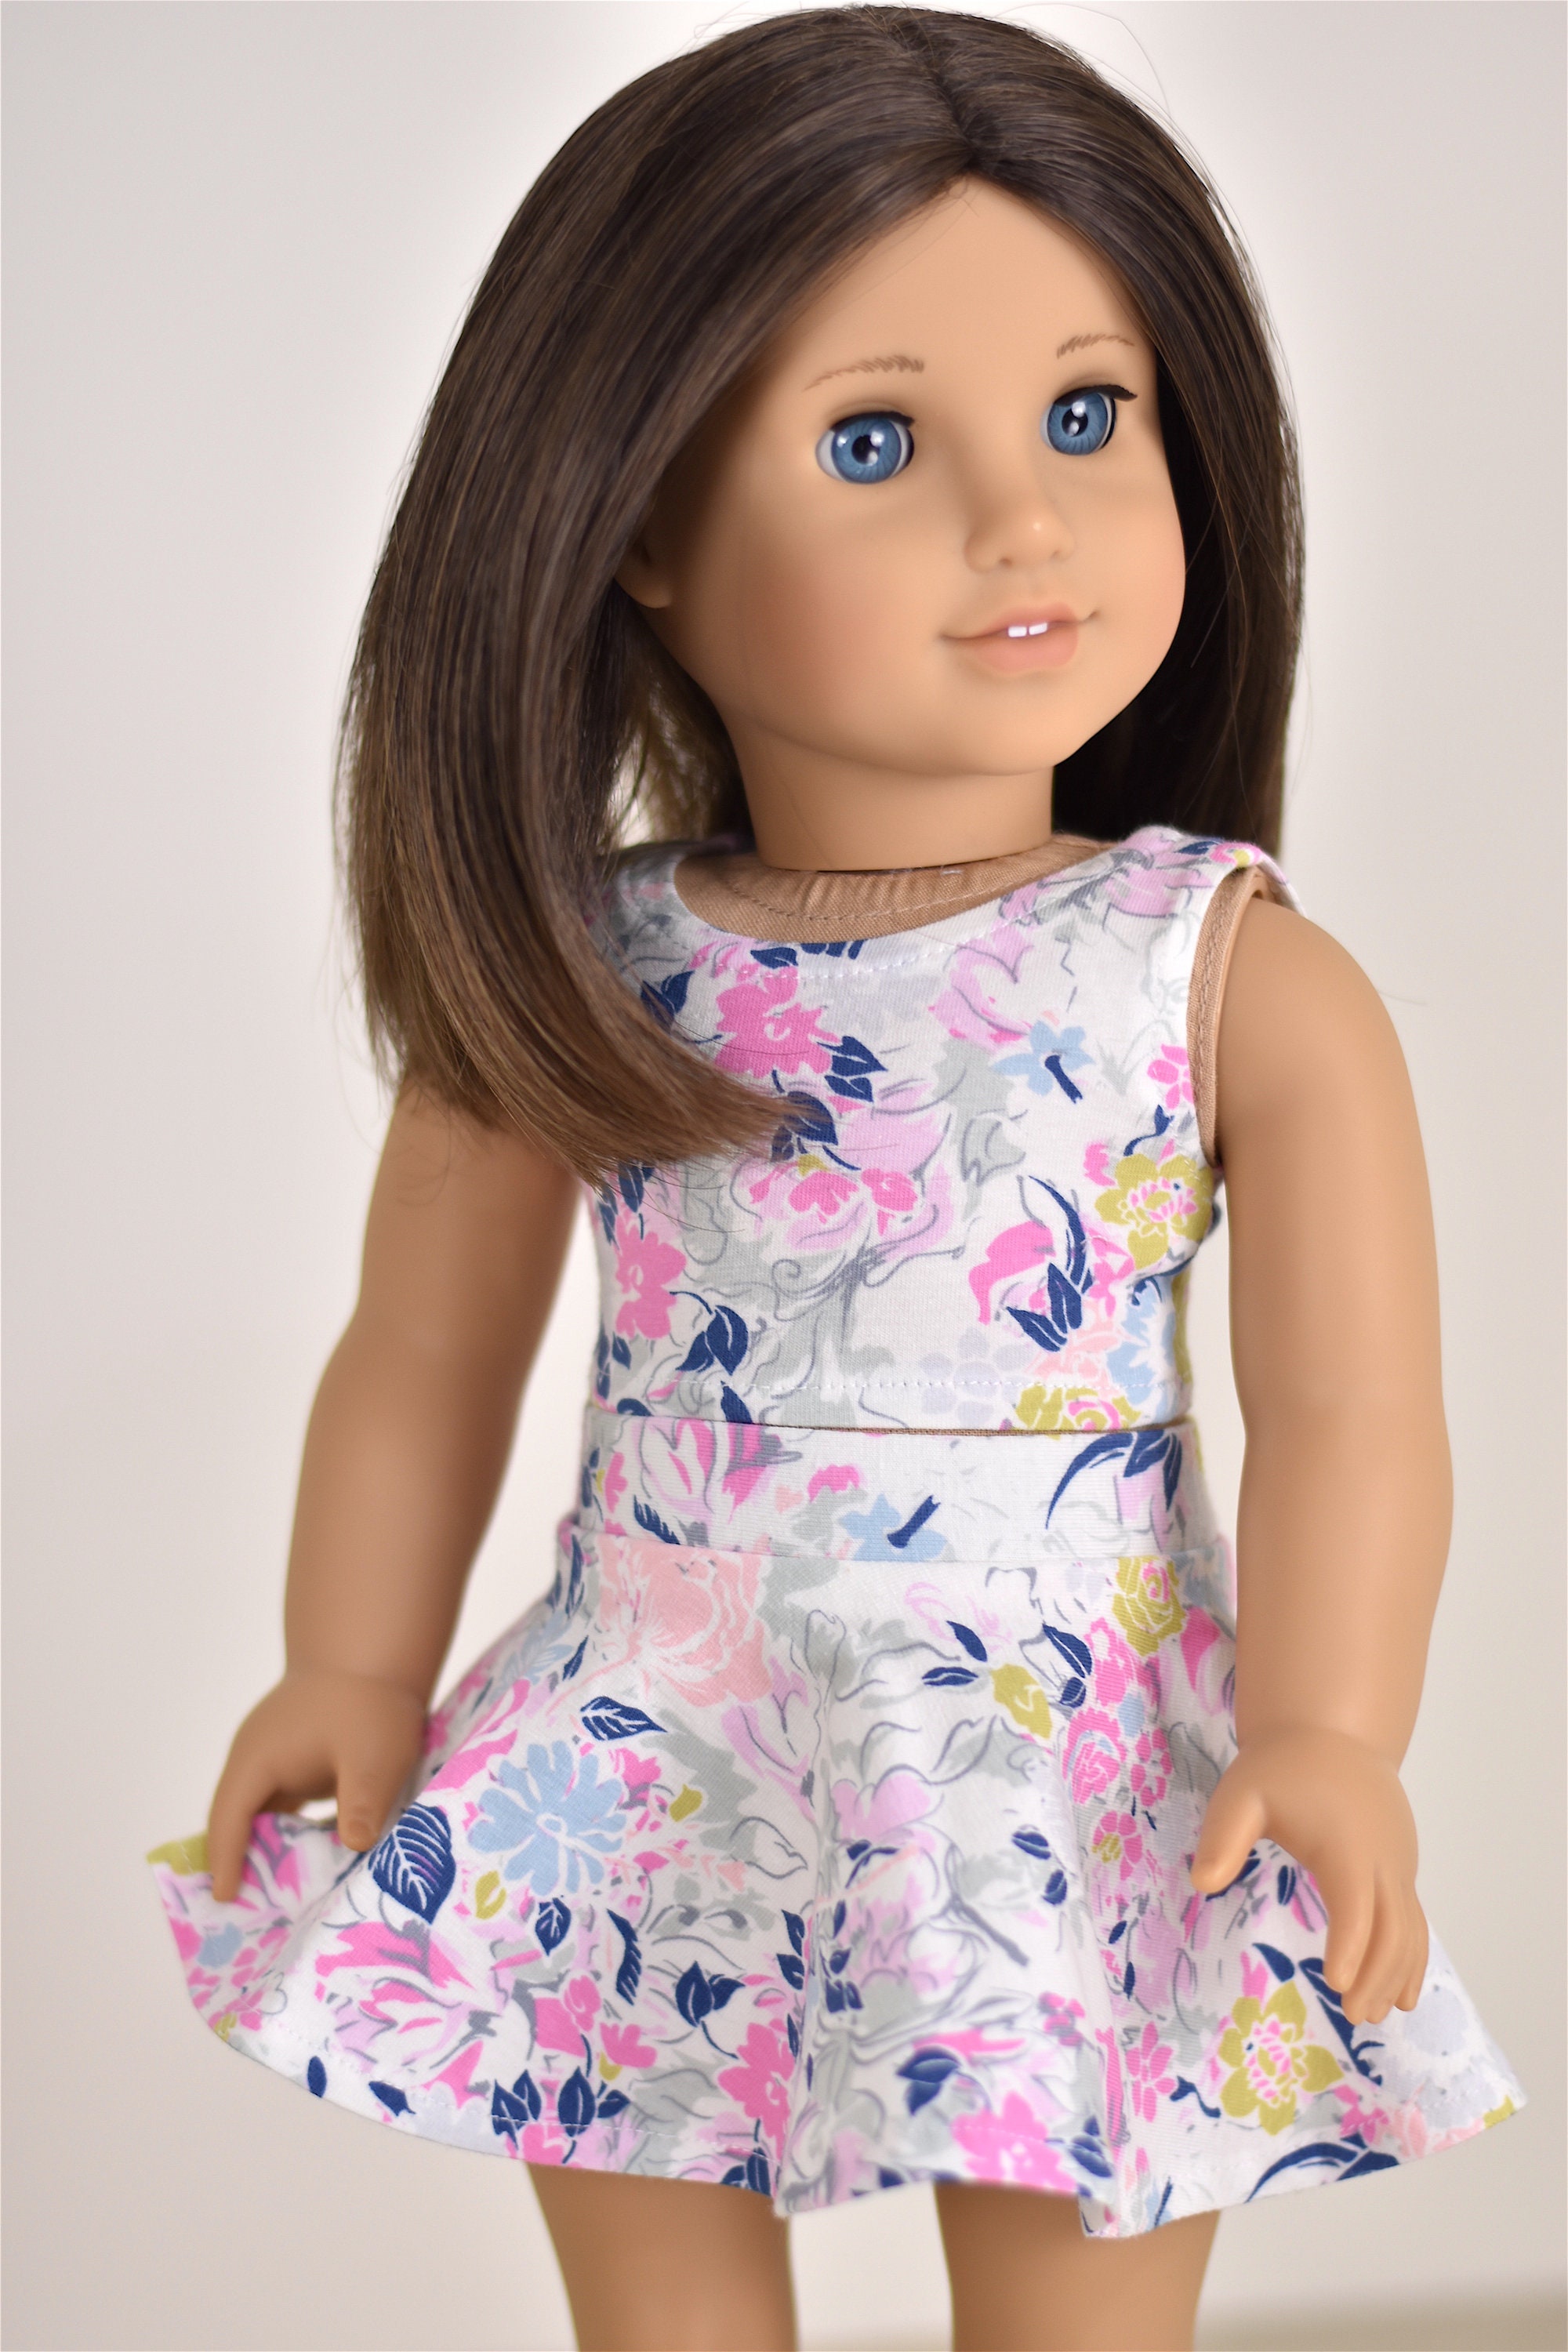 Cropped top 18 inch doll clothes Color EliteDollWorld EDW